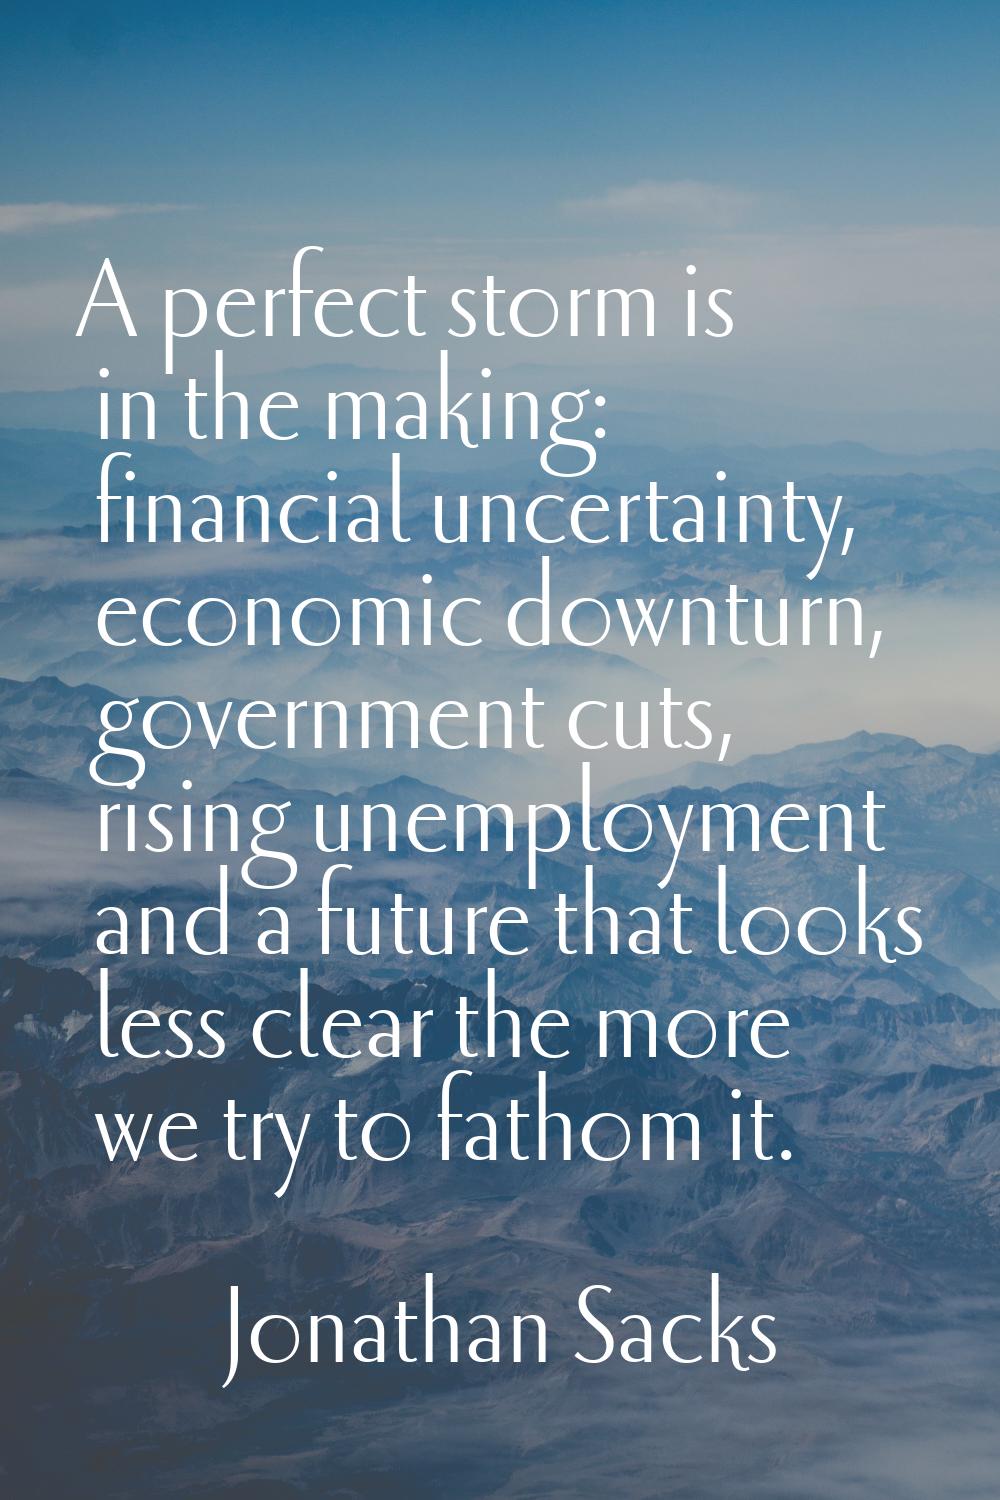 A perfect storm is in the making: financial uncertainty, economic downturn, government cuts, rising